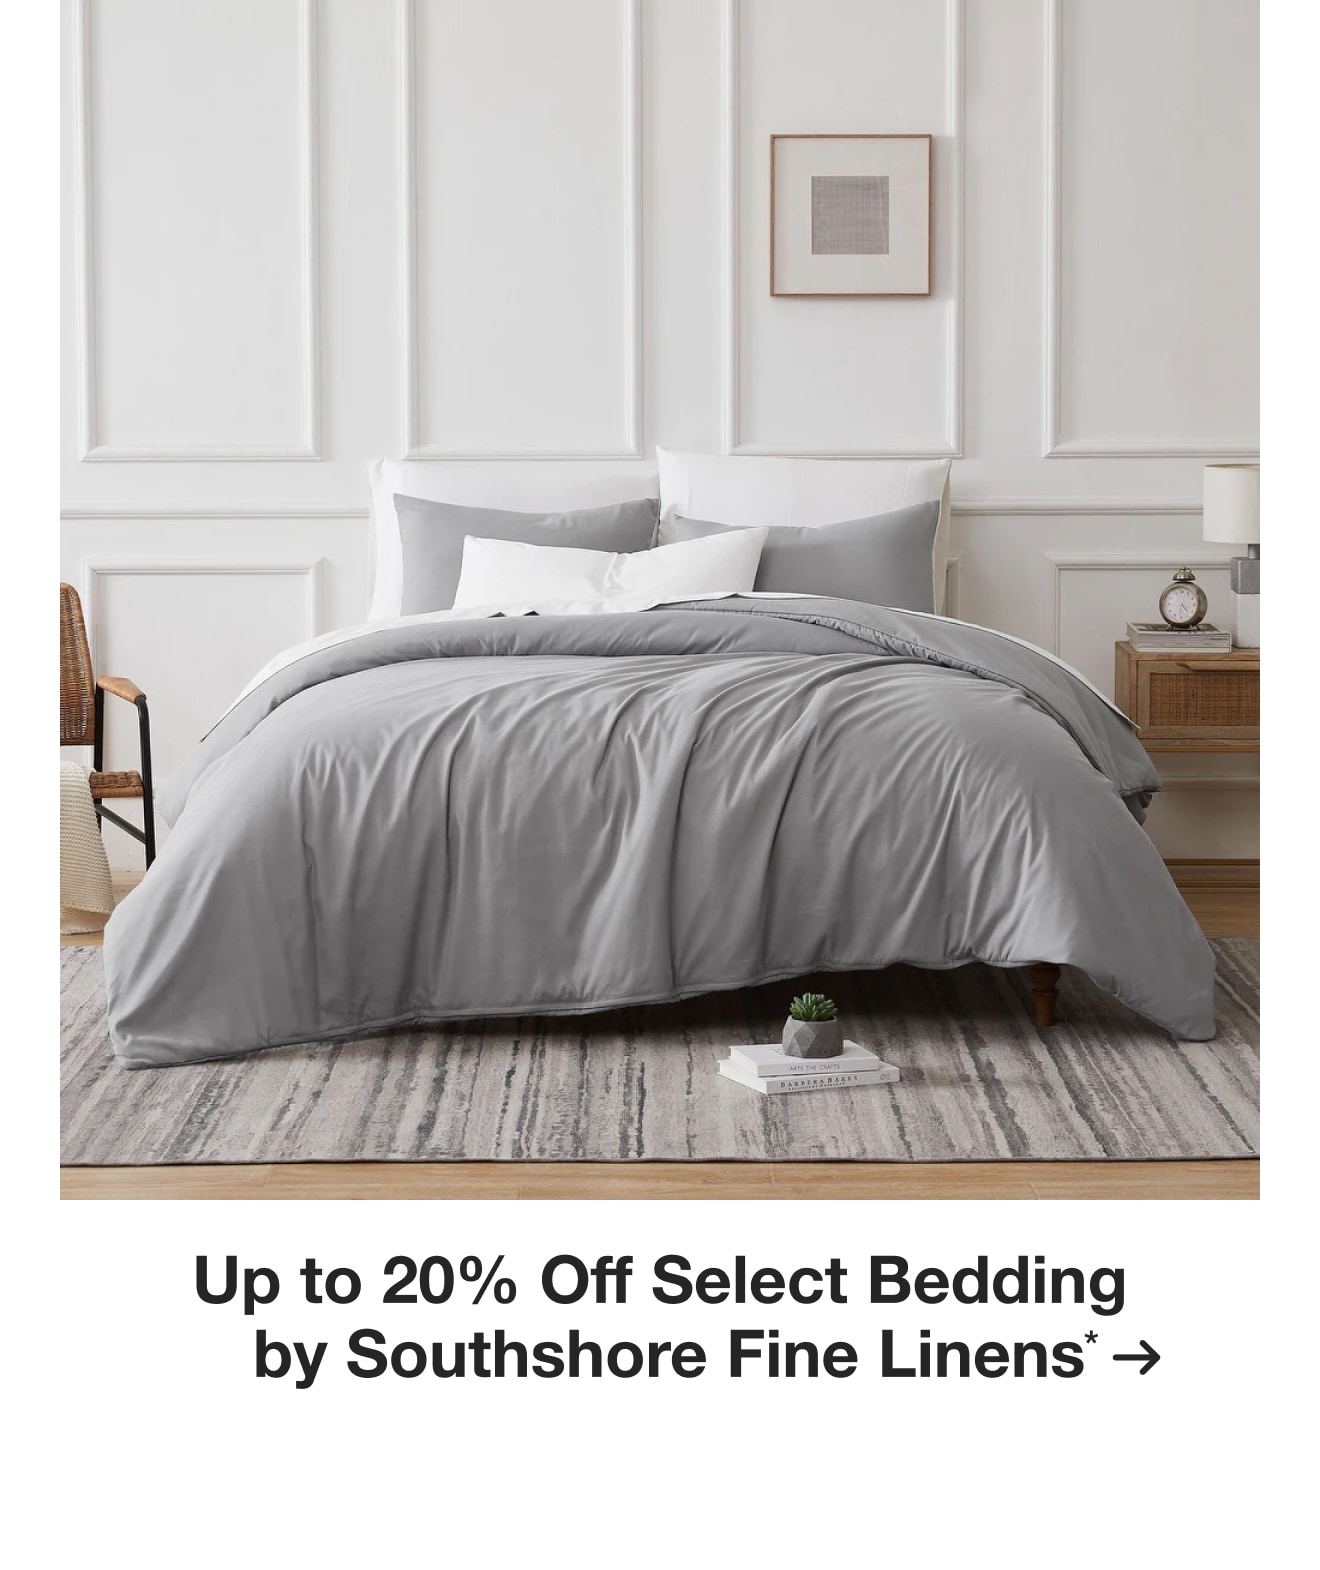 Up to 20% Off Select Bedding by Southshore Fine Linens*